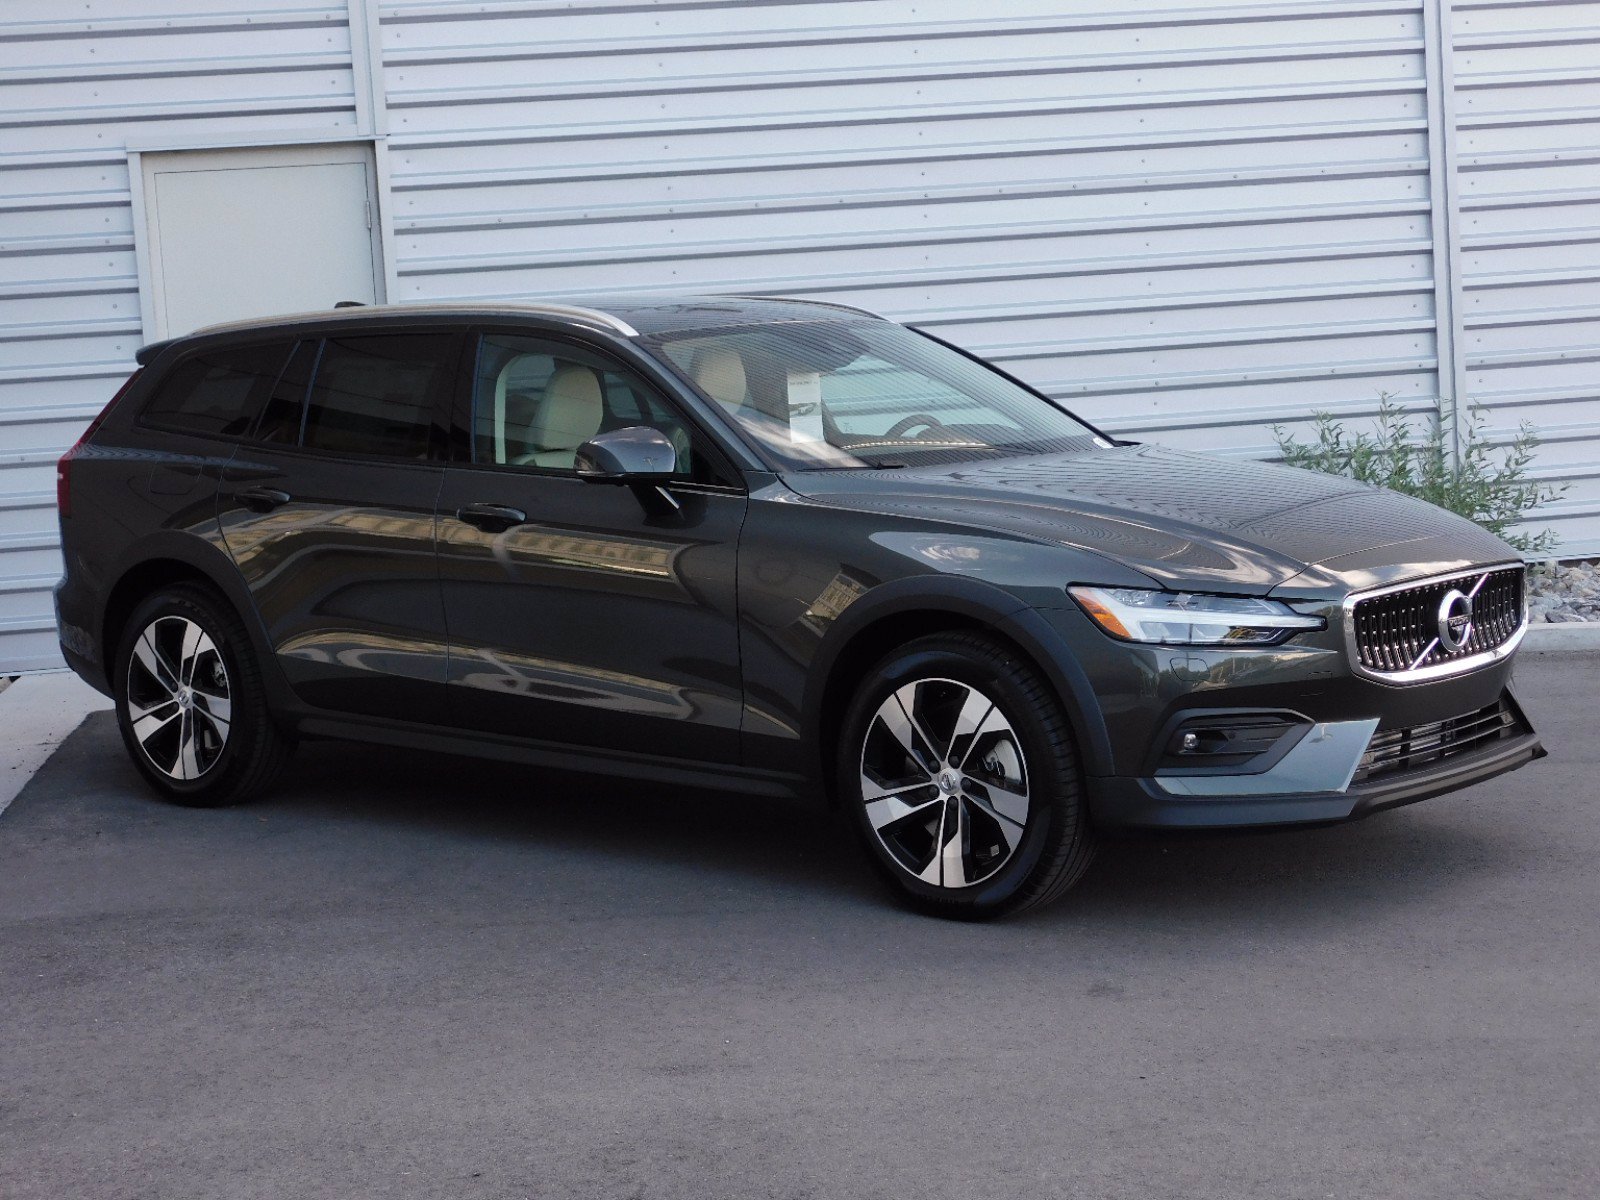 New Volvo V60 Cross Country V60awd T5 Momentum With Navigation Awd